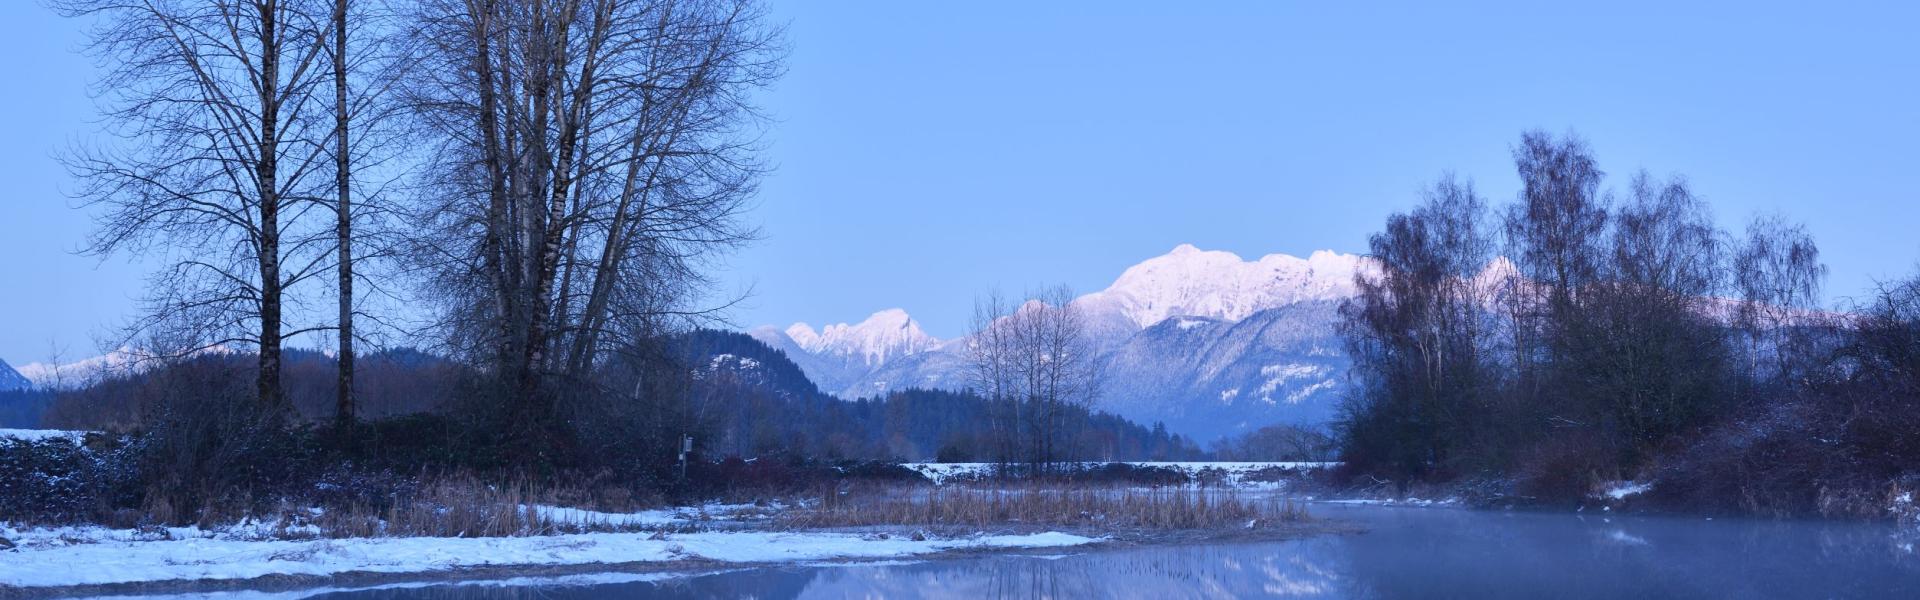 Alouette River and Golden Ears Mountain on a winter evening